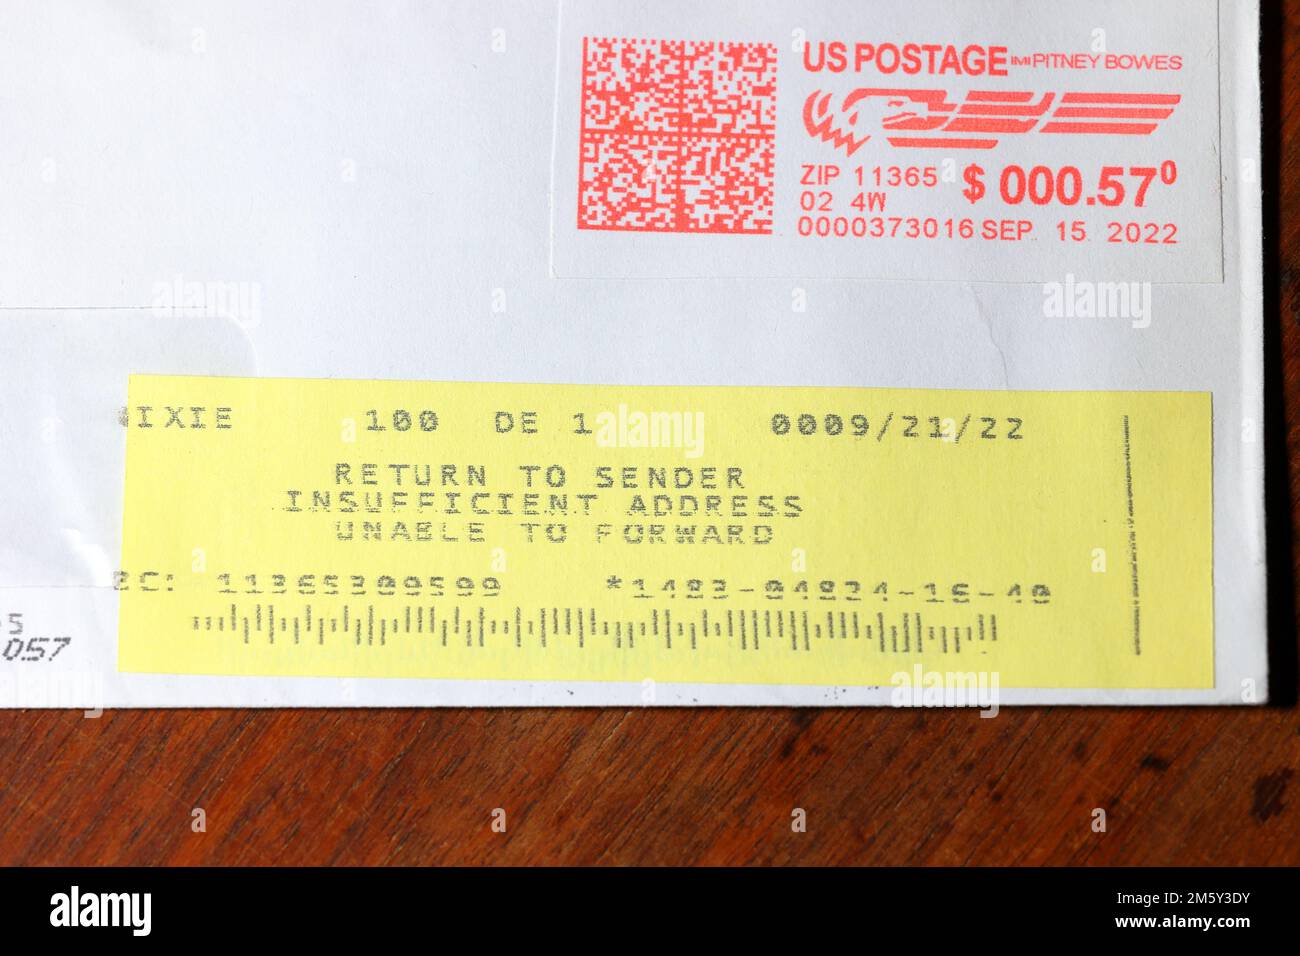 A Return to Sender Insufficient Address Unable to Forward sticker on a letter sent through the US Postal Service. Stock Photo